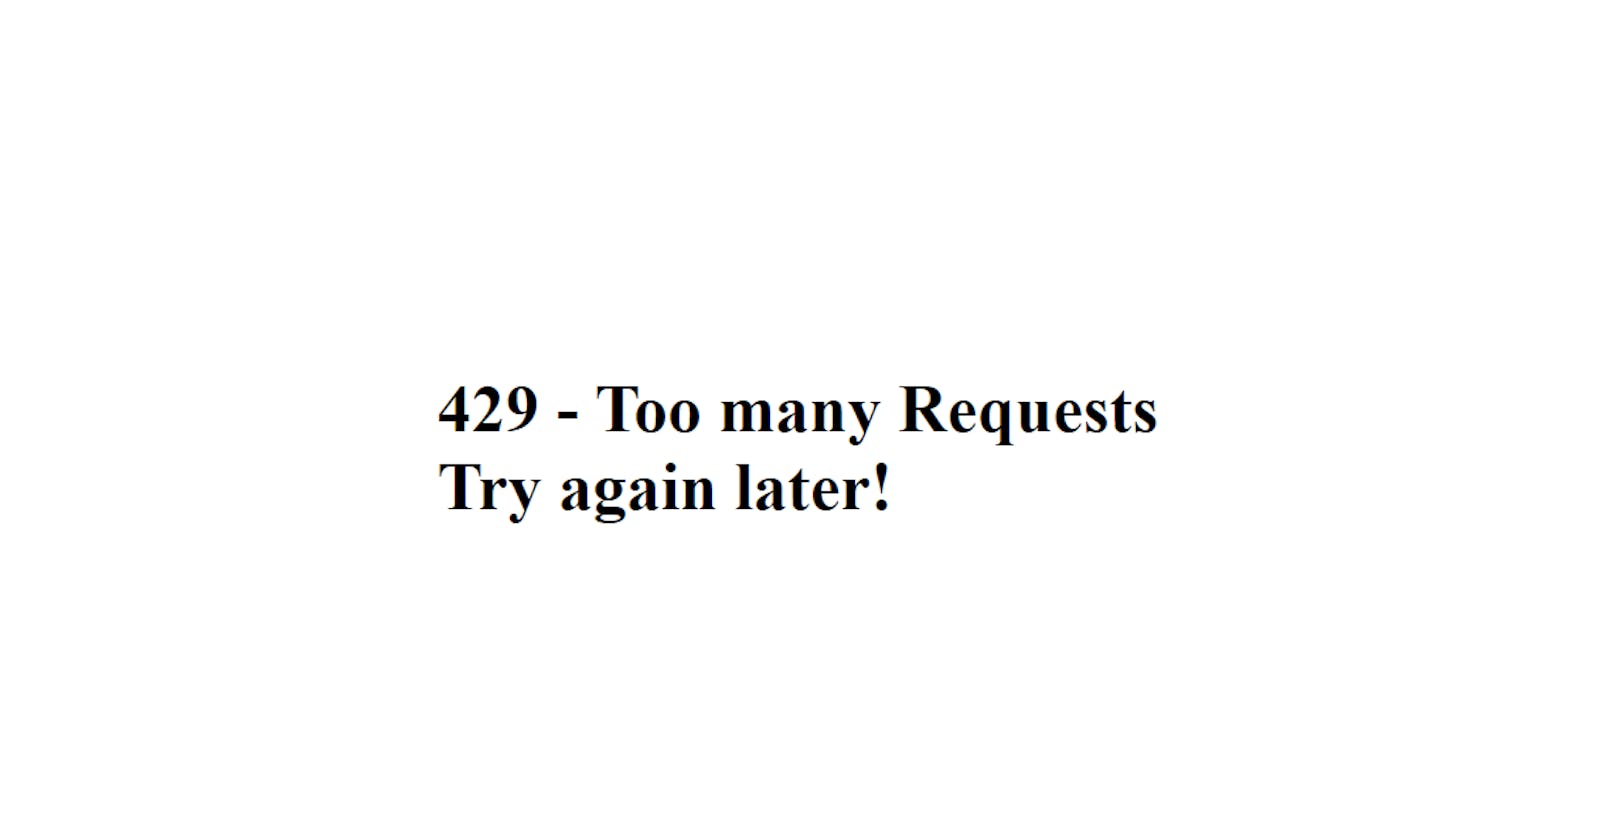 What is a 429 -Too Many Requests?